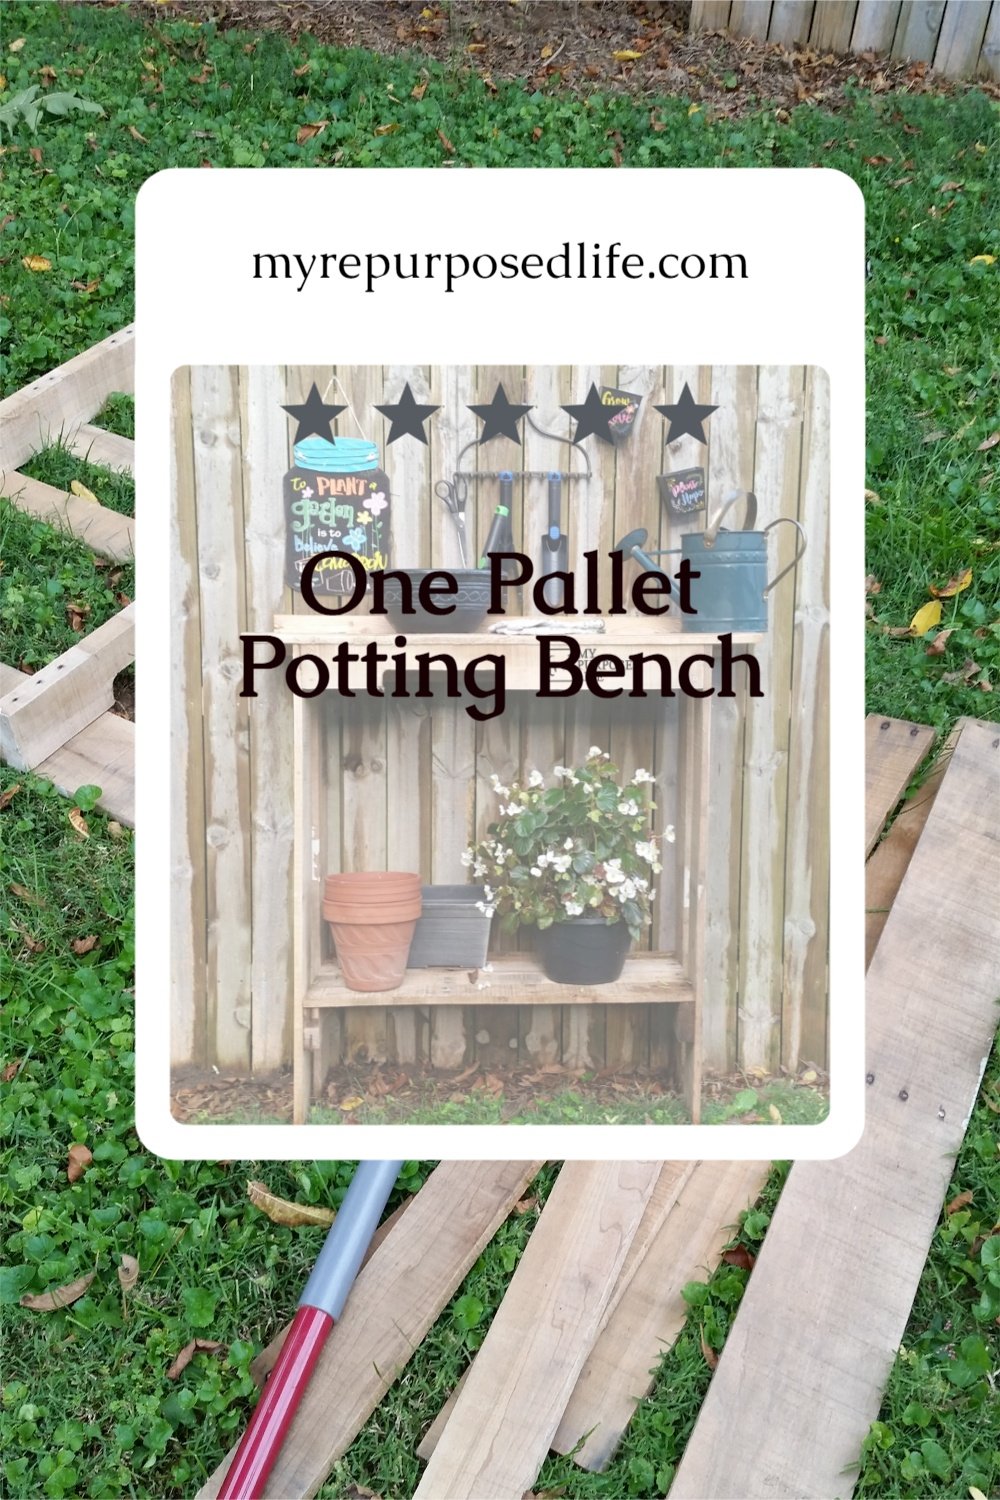 How to make a quick and easy one pallet project. This easy potting table also known as potting bench is a perfect weekend project for backyard garden area. #MyRepurposedLife #repurposed #pallet #pottingbench #outdoor #beveragestation via @repurposedlife